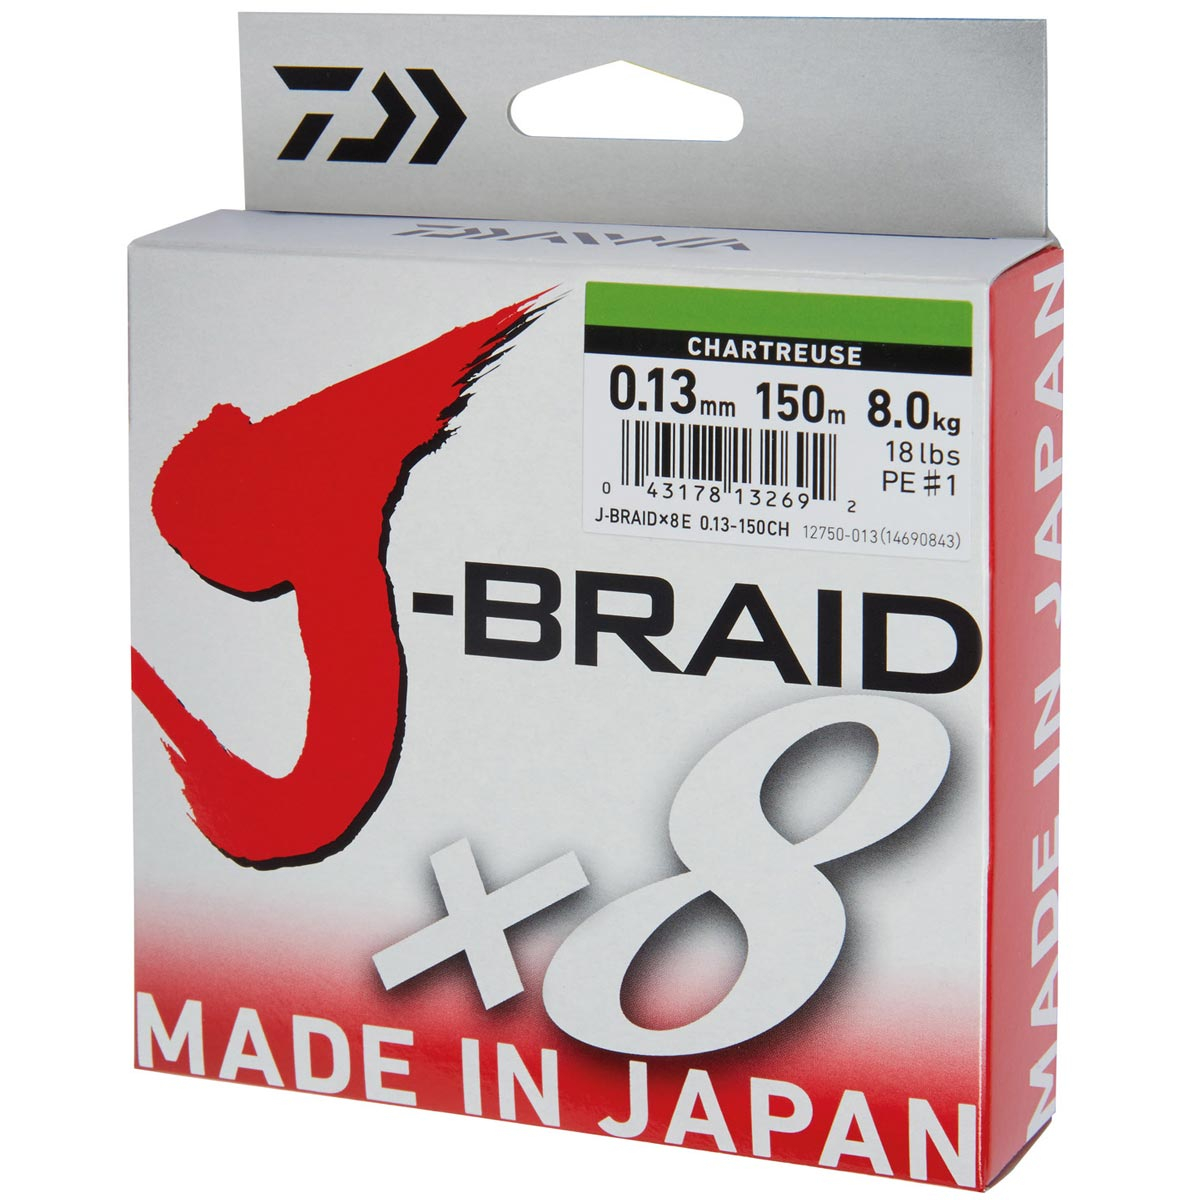 Premium Braided Fishing Lines - Top Brands Collection